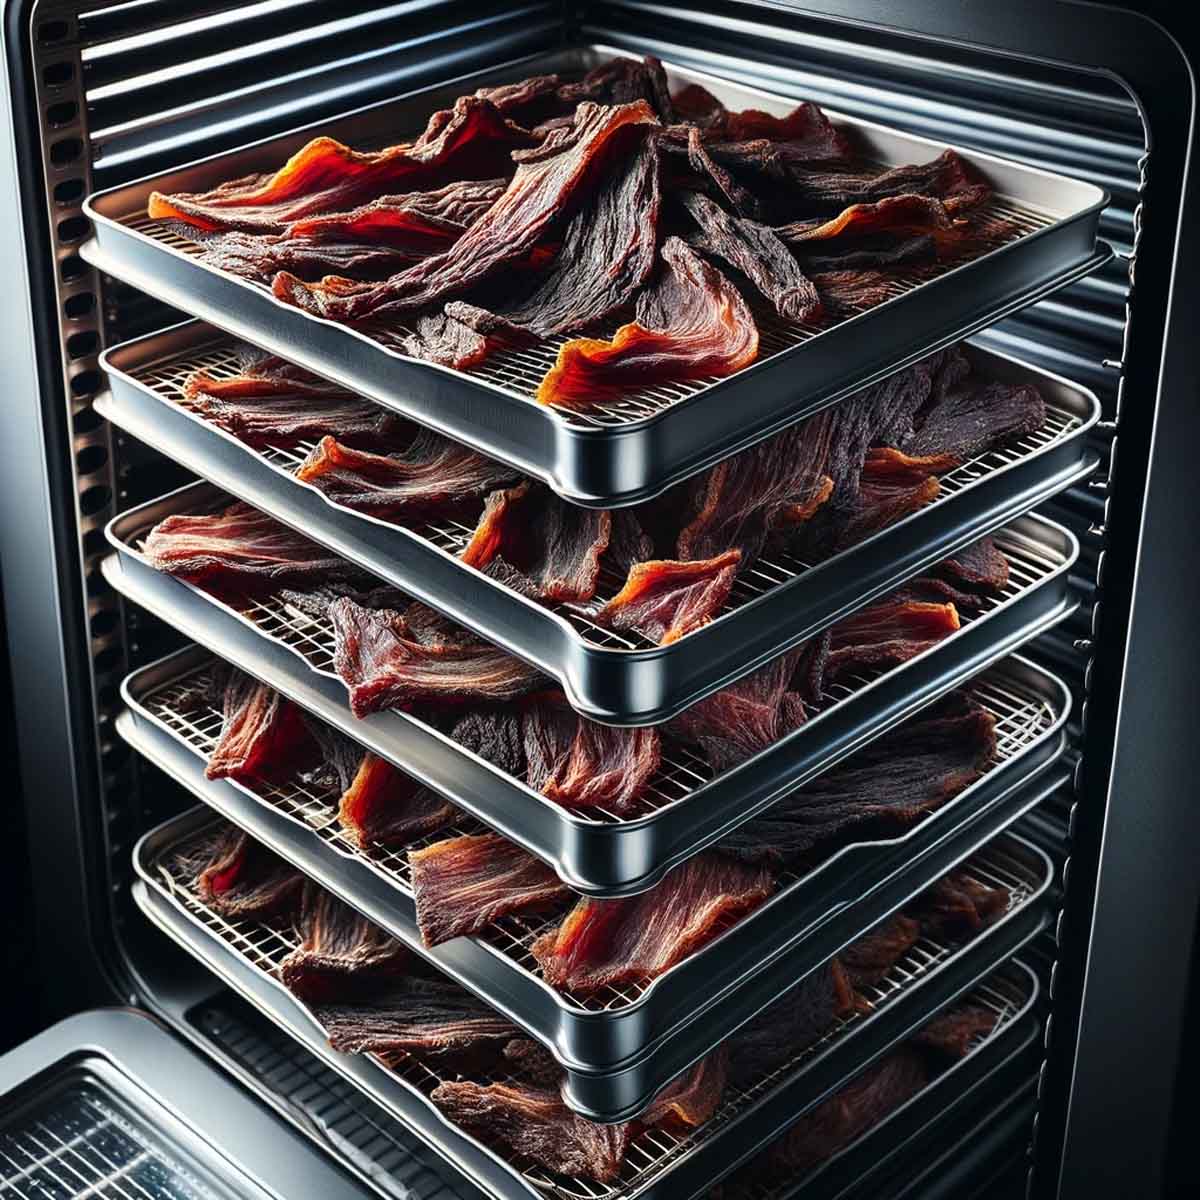 Interior view of a dehydrator with trays of beef jerky mid-way through the drying process.